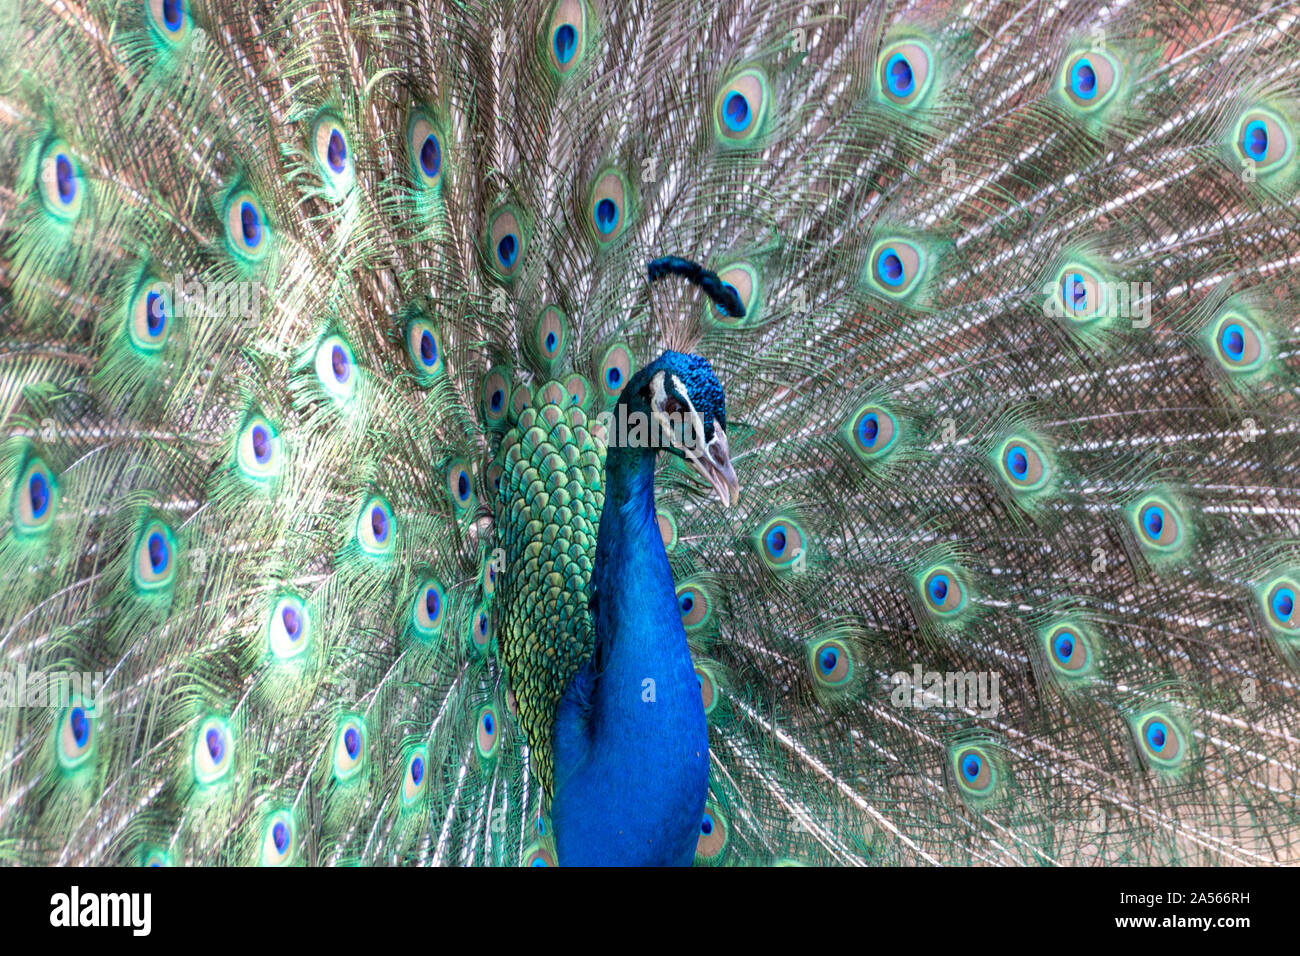 a close up view of a beautiful peacock Stock Photo